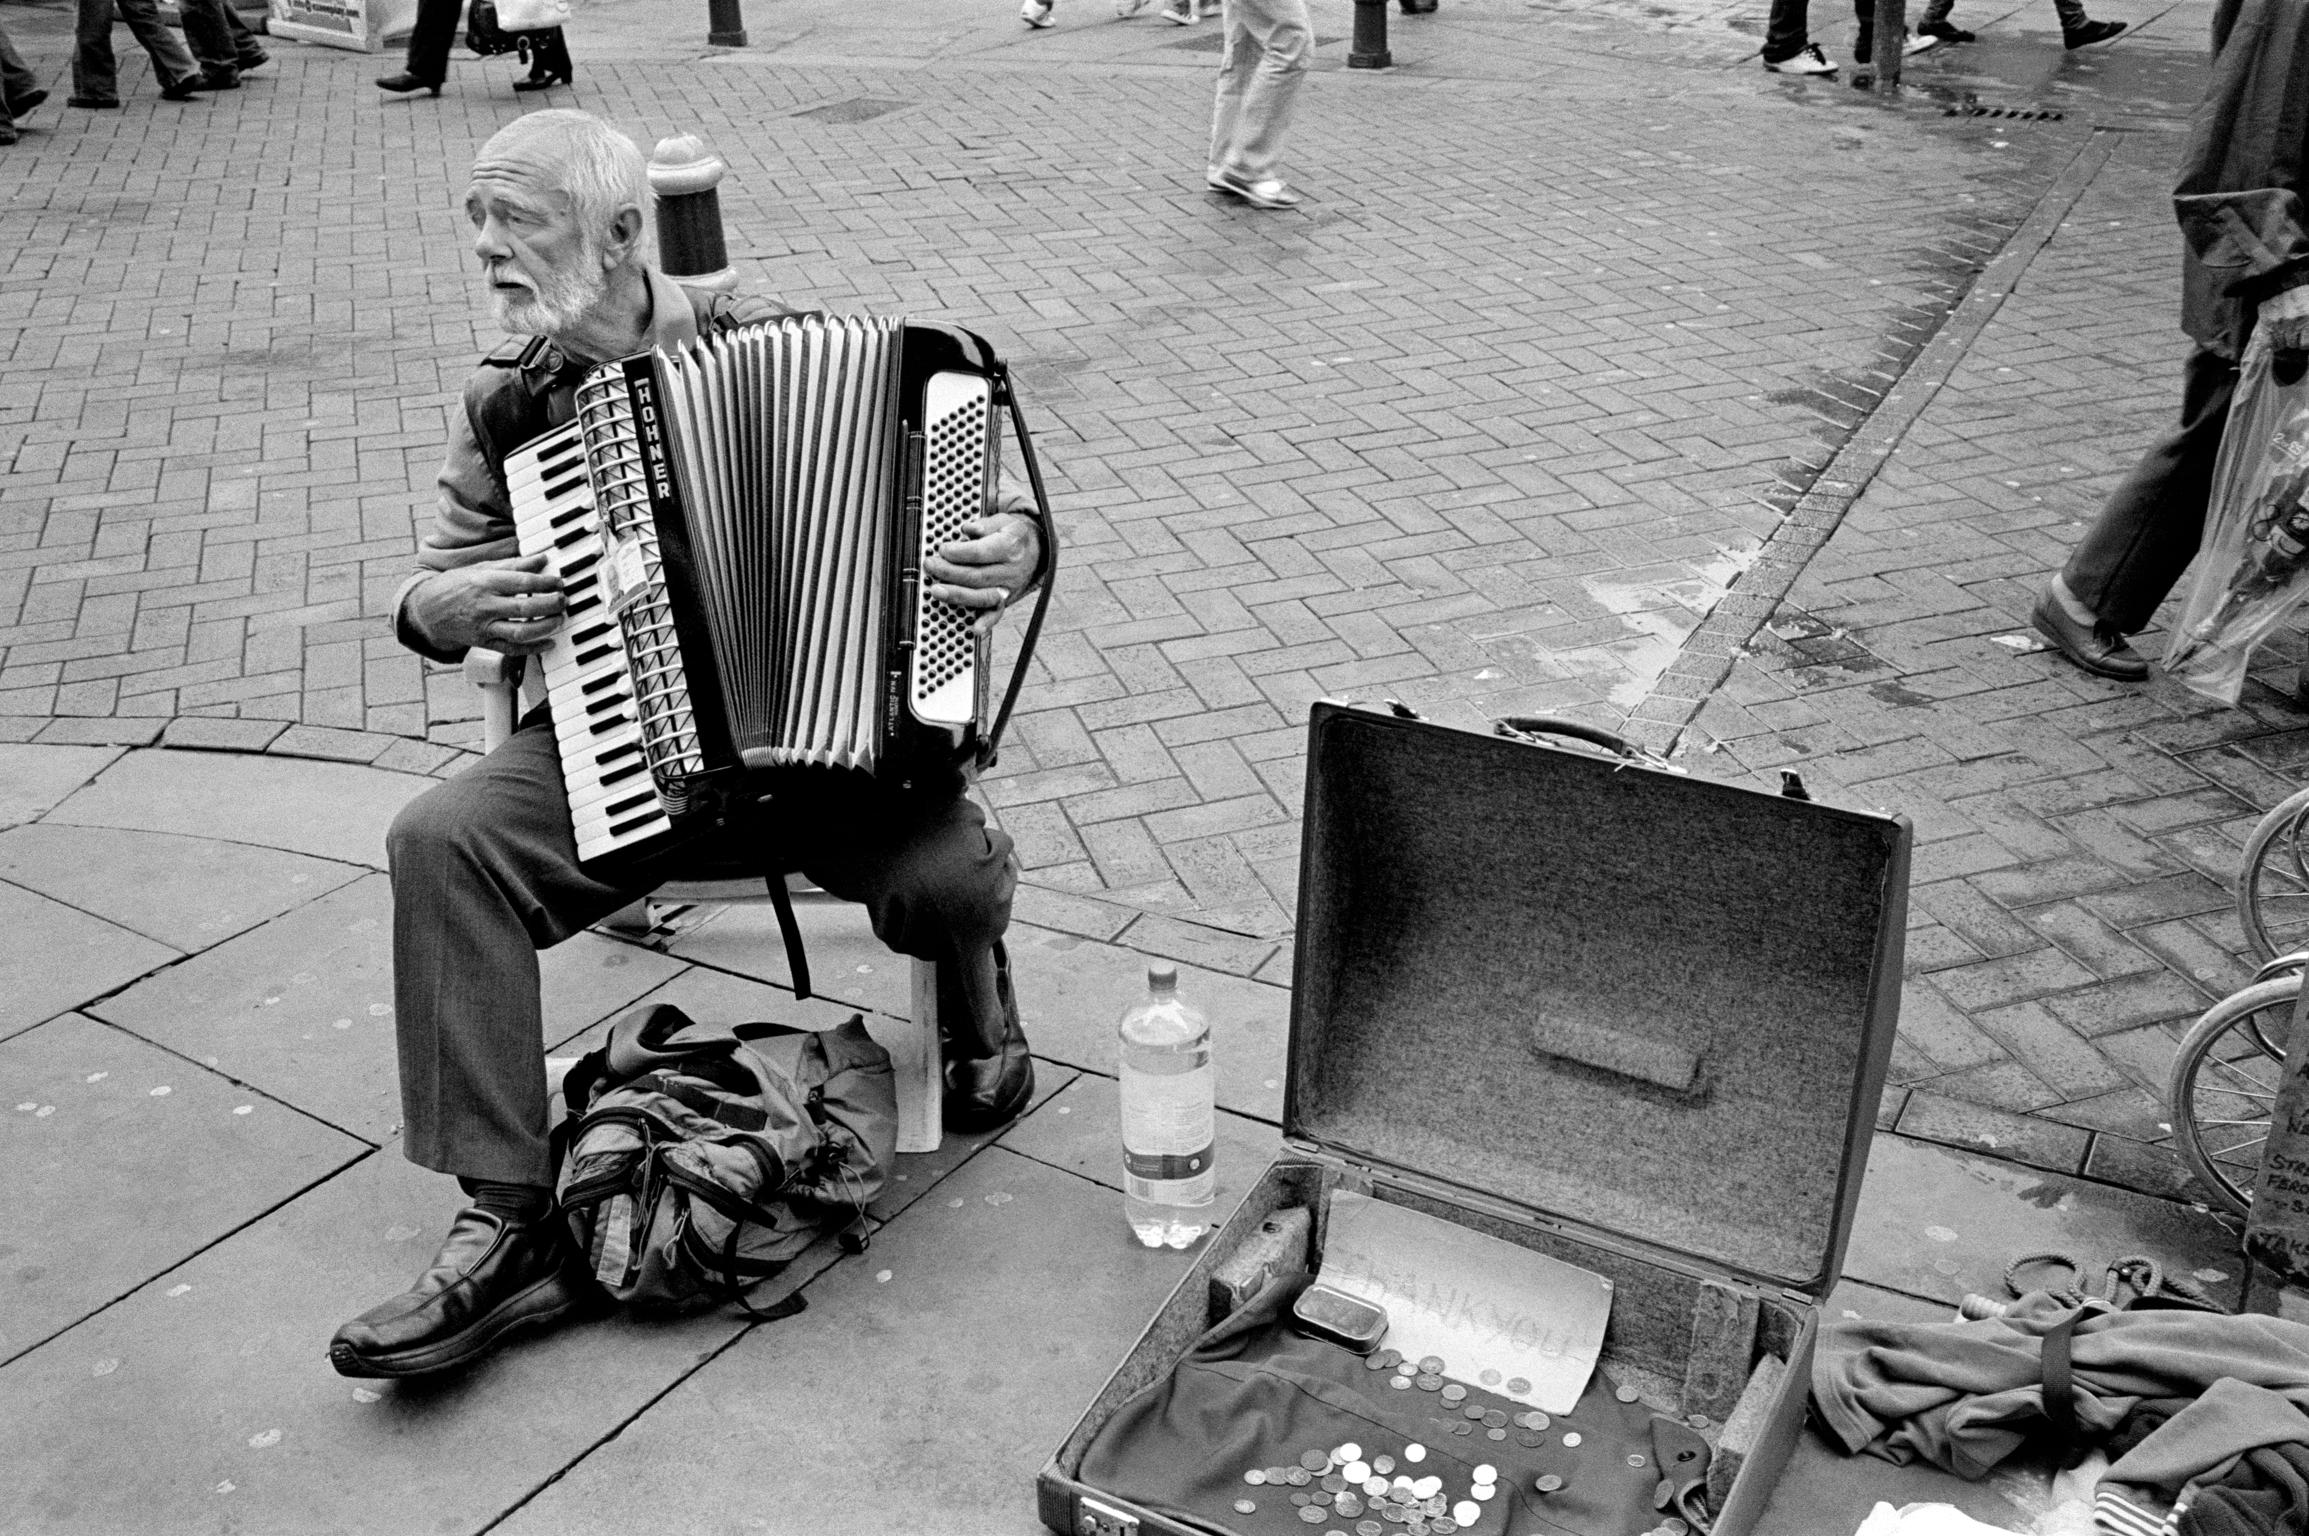 Busker playing music in the main street. Newport, Wales